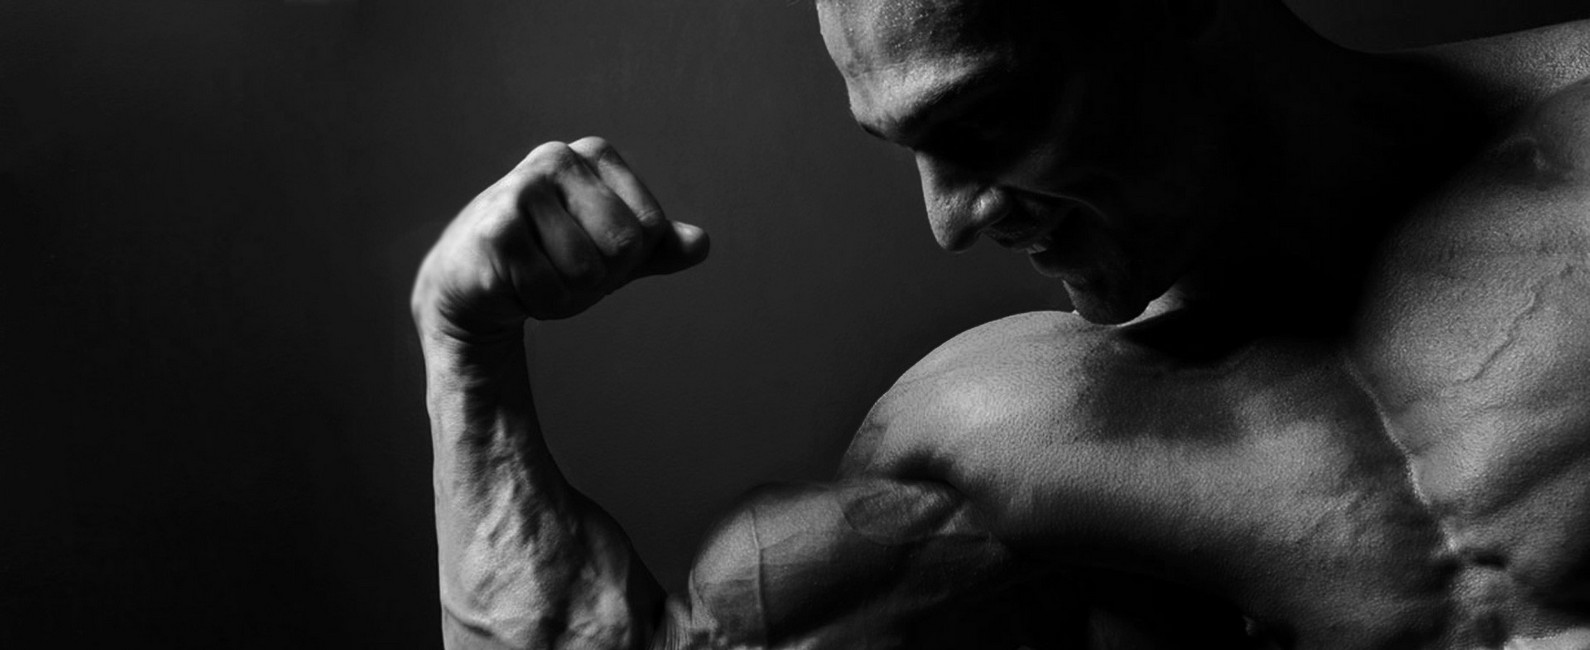 Steroid cycles for strength